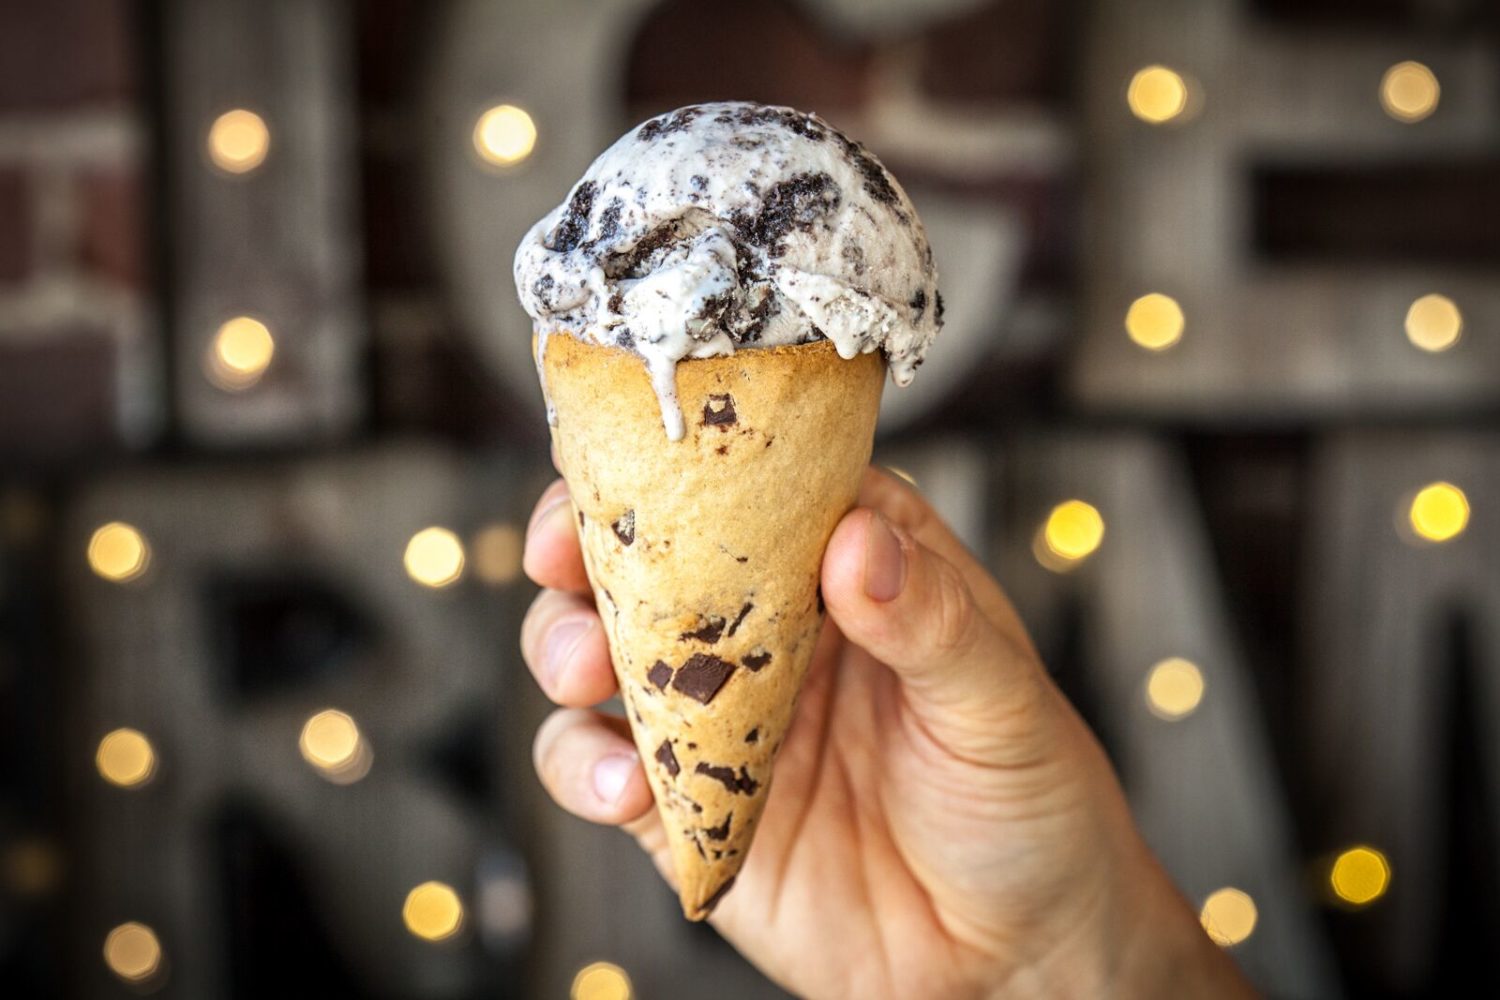 Oreo Ice Cream within a Chocolate Cookie Cone at WooBerry on Highland Street in Worcester (Photo by Erb Photography)